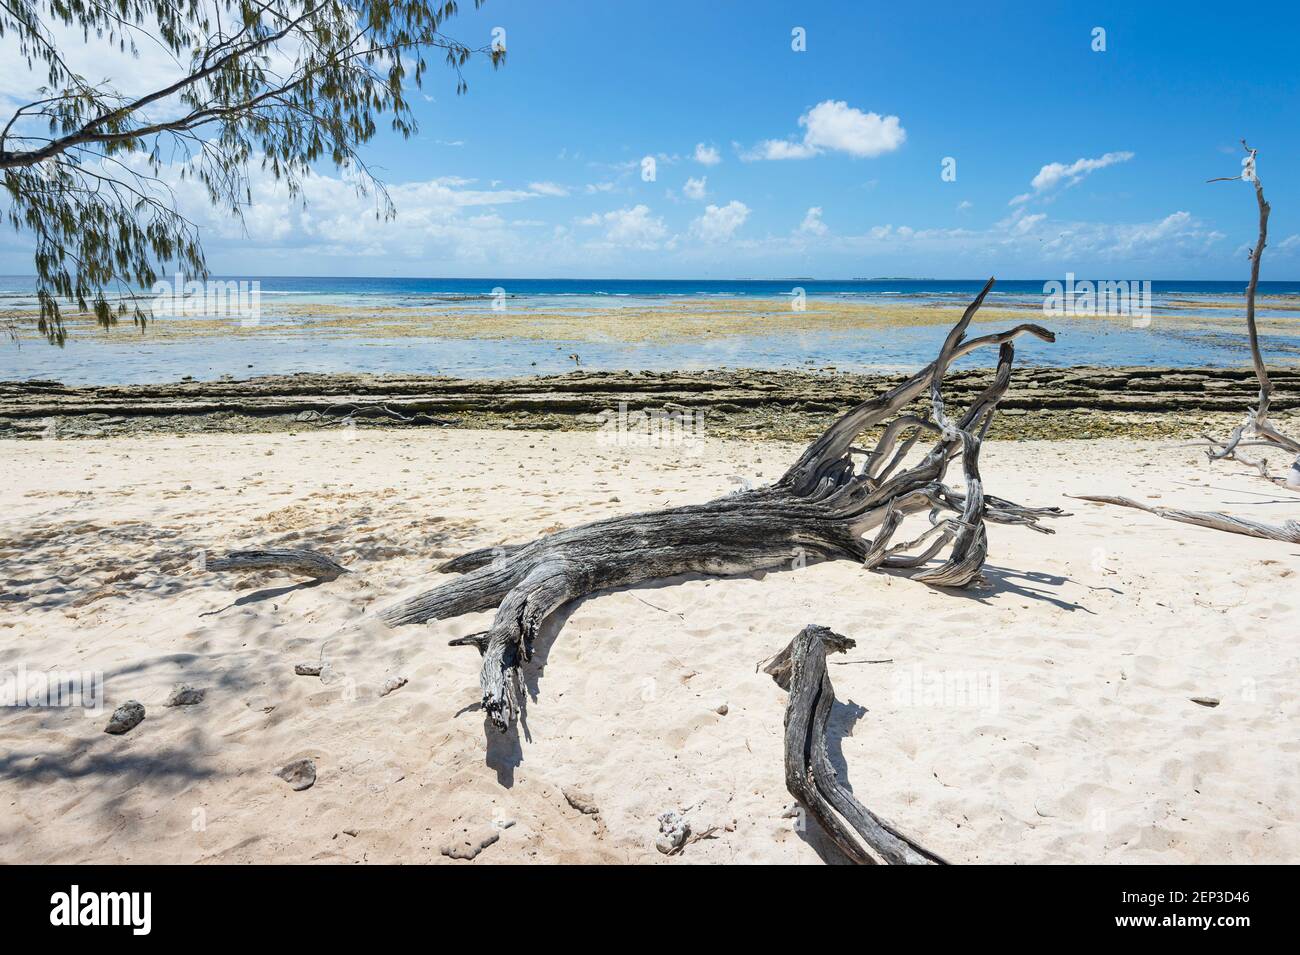 Driftwood on the beach at the coral cay of Lady Musgrave Island, Southern Great Barrier Reef, Queensland, QLD, Australia Stock Photo